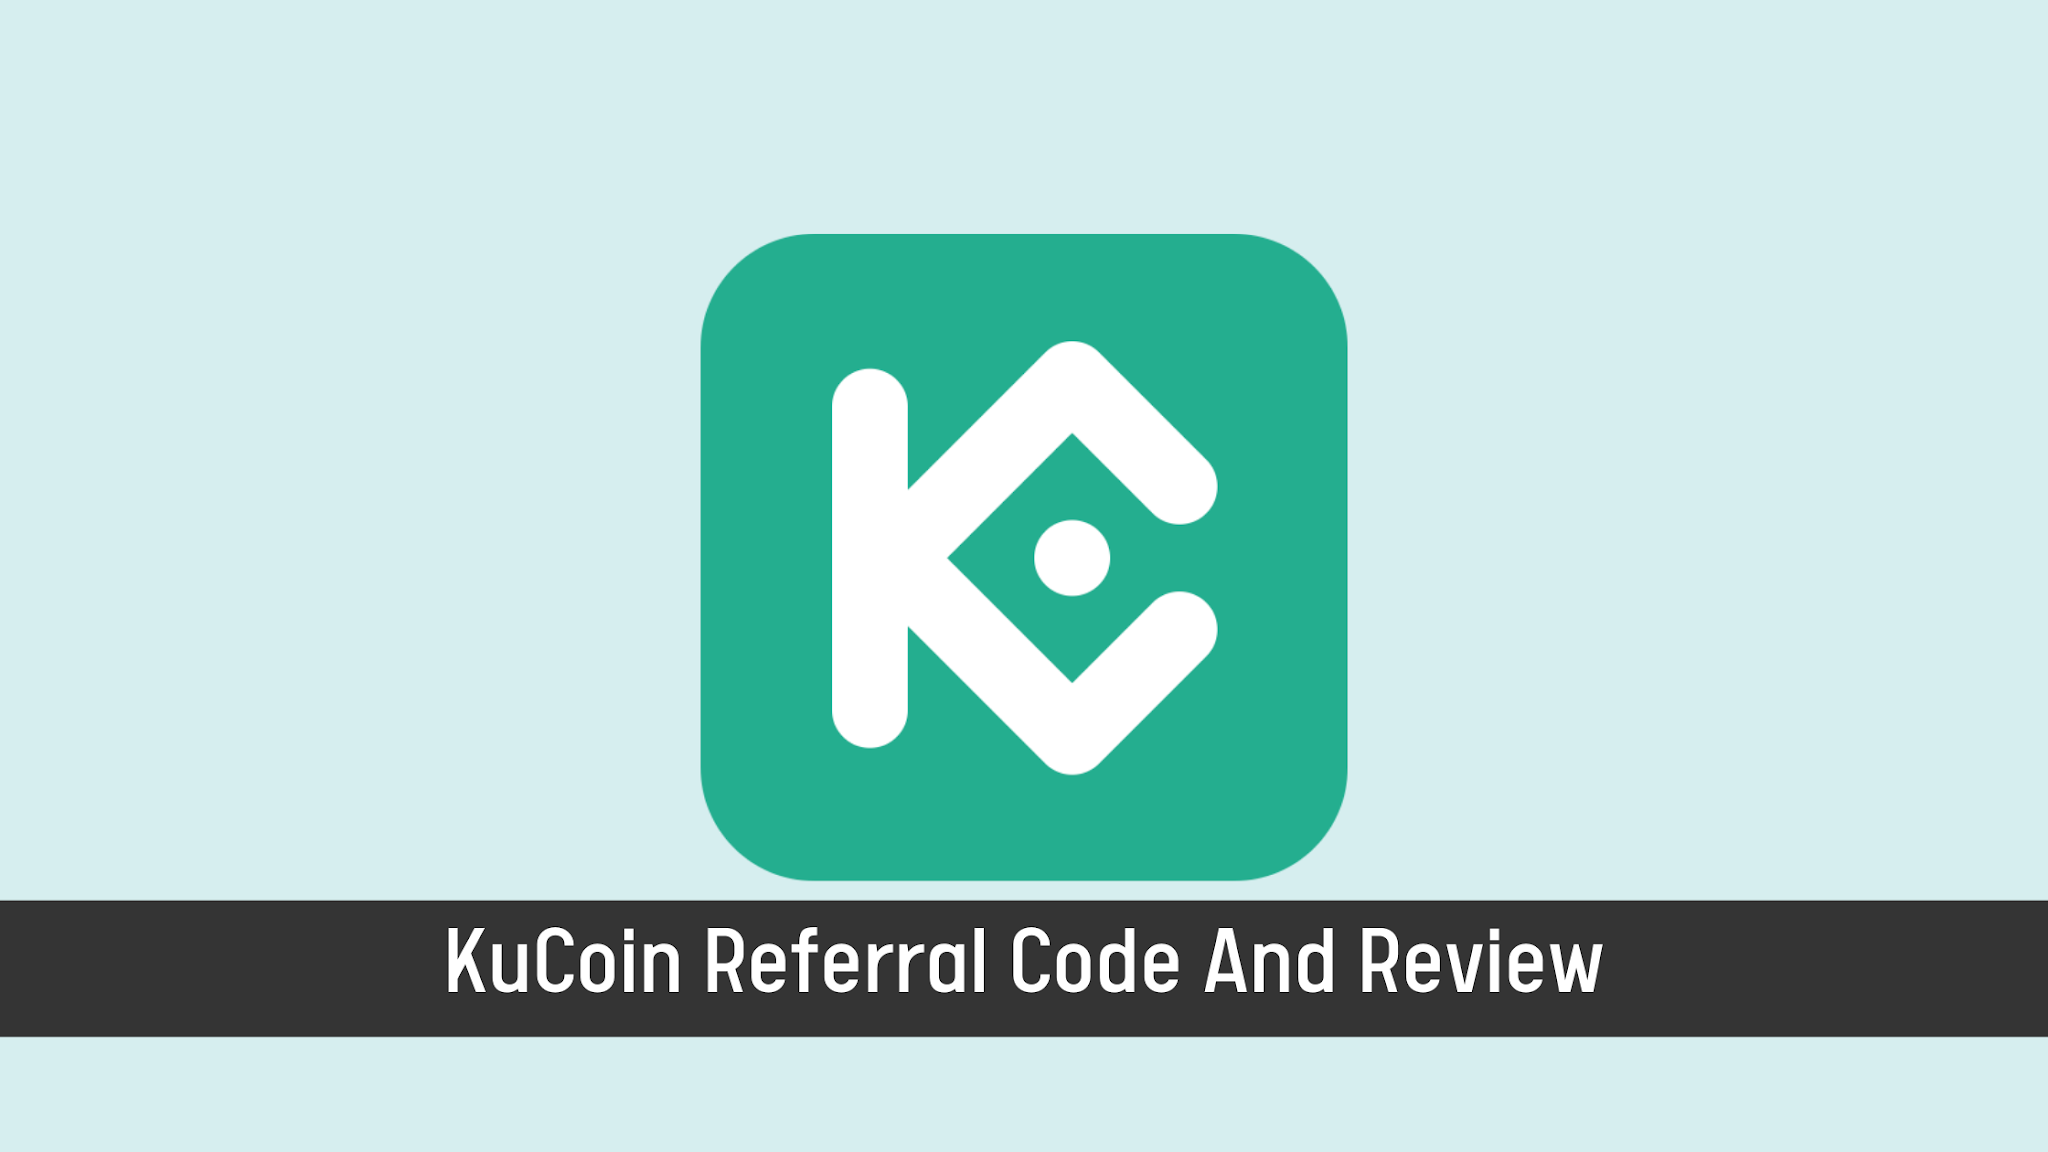 KuCoin Referral Code And Review